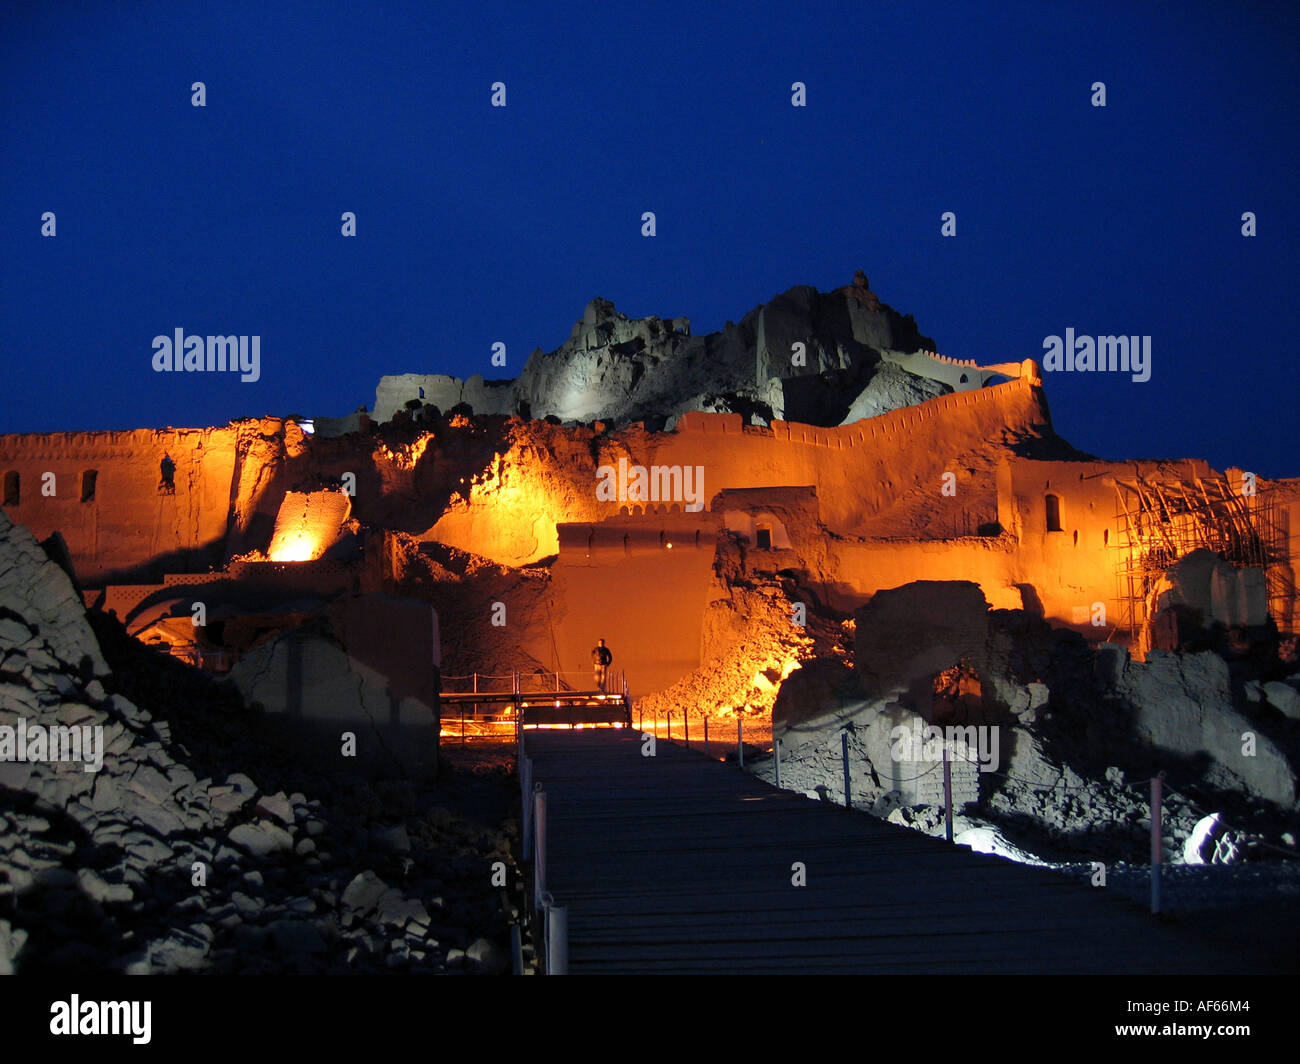 View of the old citadel (Arg e Bam) in Bam a year after the earthquake that destroyed the whole city, Iran, November 2004 Stock Photo